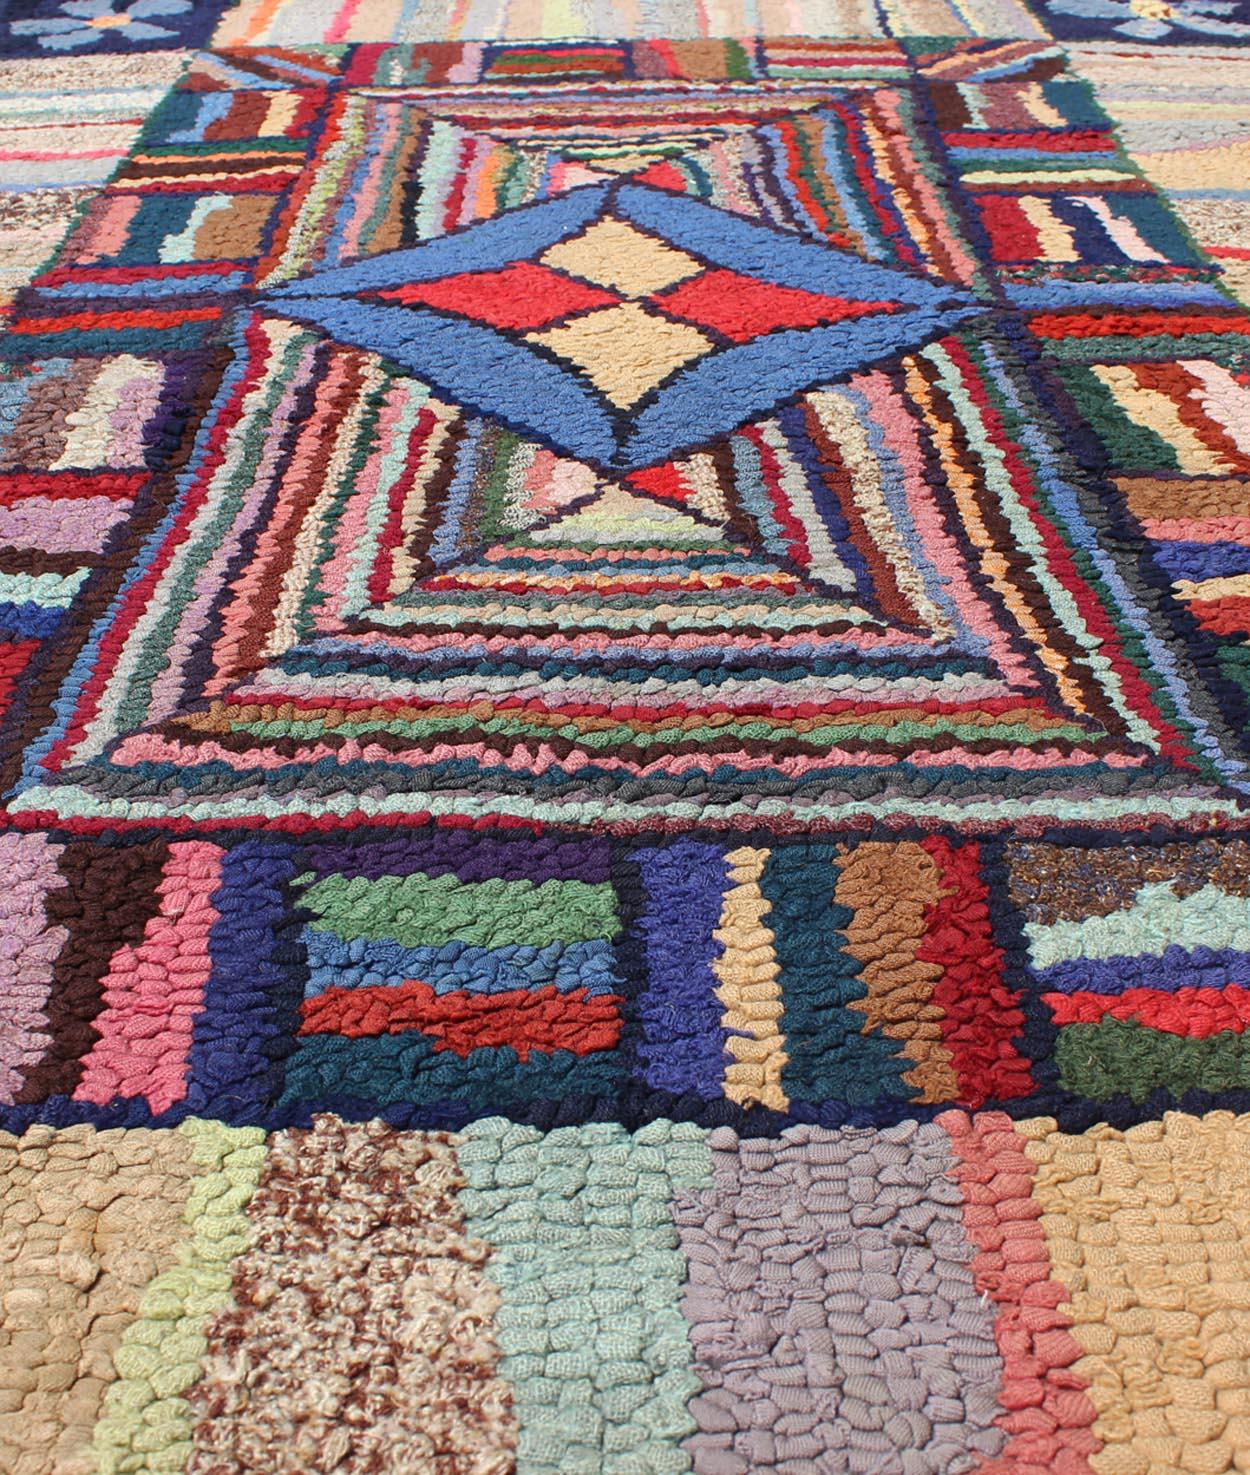 Cotton Antique American Hooked Rug with Colorful Geometric Design with Striped Border